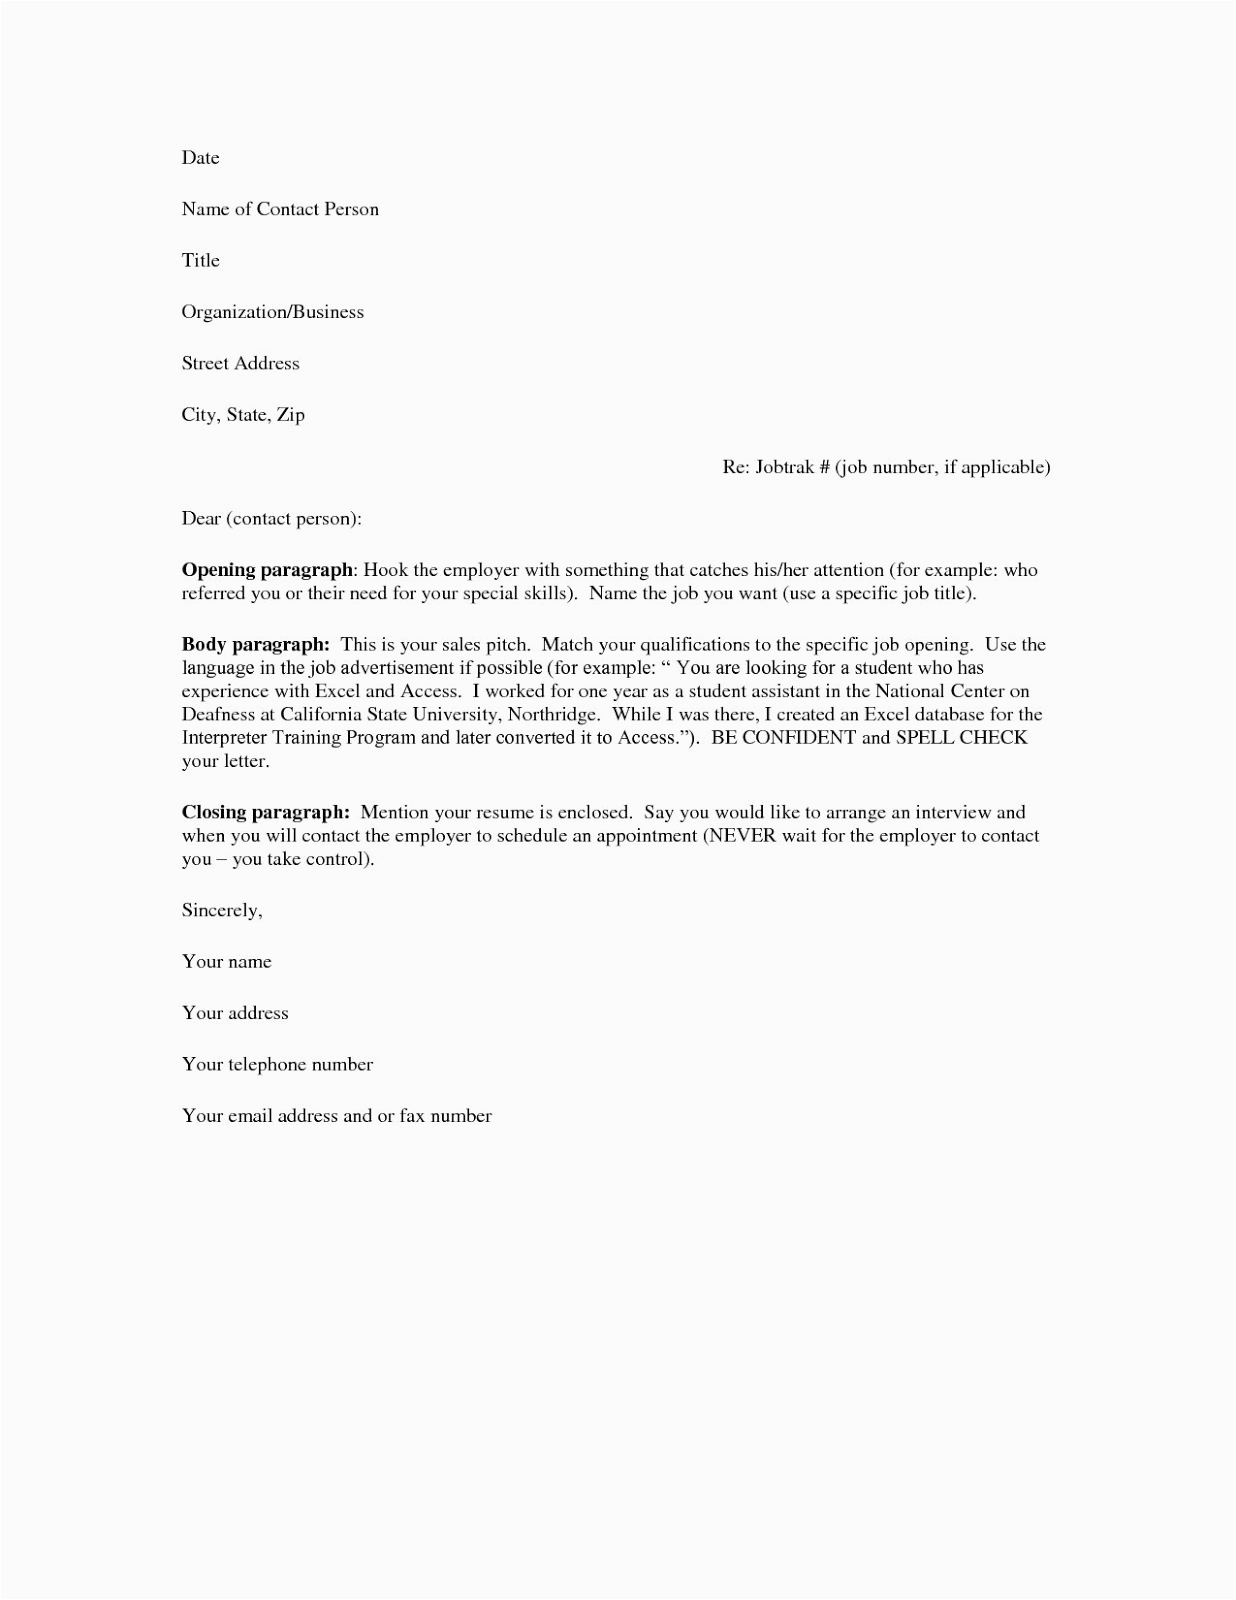 Free Sample Cover Letter and Resume Free Cover Letter Samples for Resumes